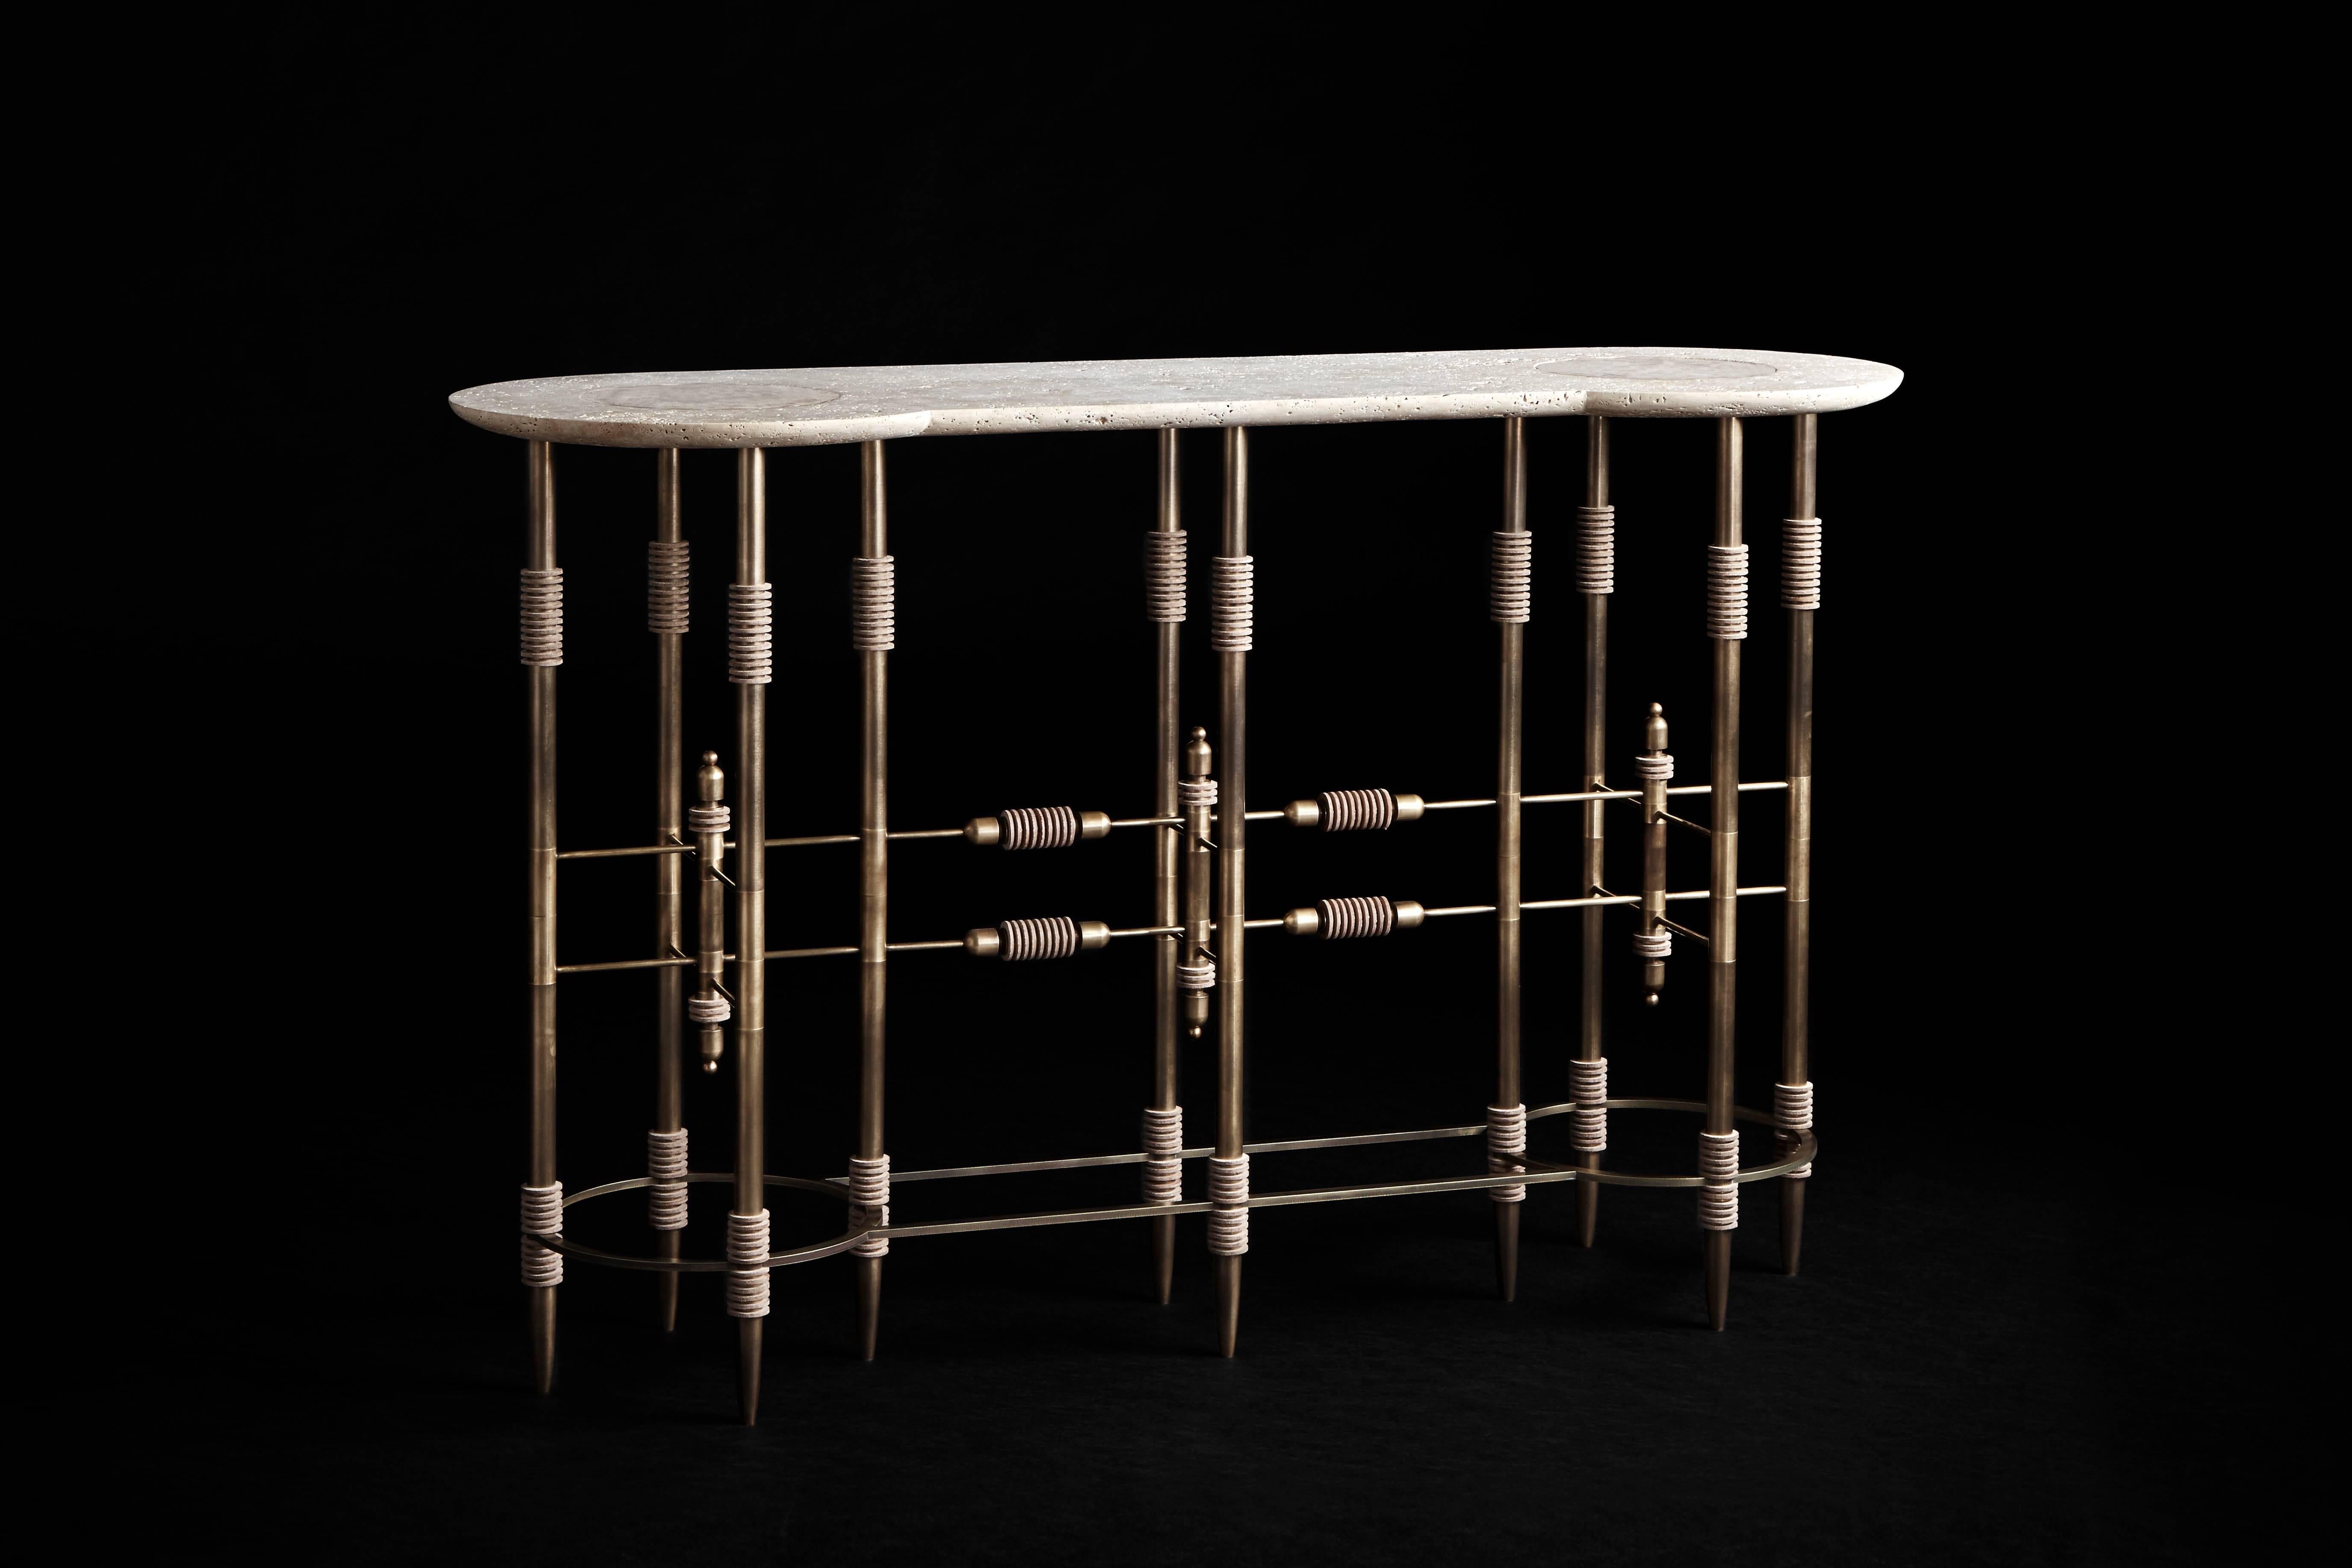 The delicate forms of the Pars series evoke nomadic tray tables found across the Middle East. Hand-cut leather disks stack along brass legs, and inset leather rounds provide soft points of interaction in the stone table surfaces.

Travertine and